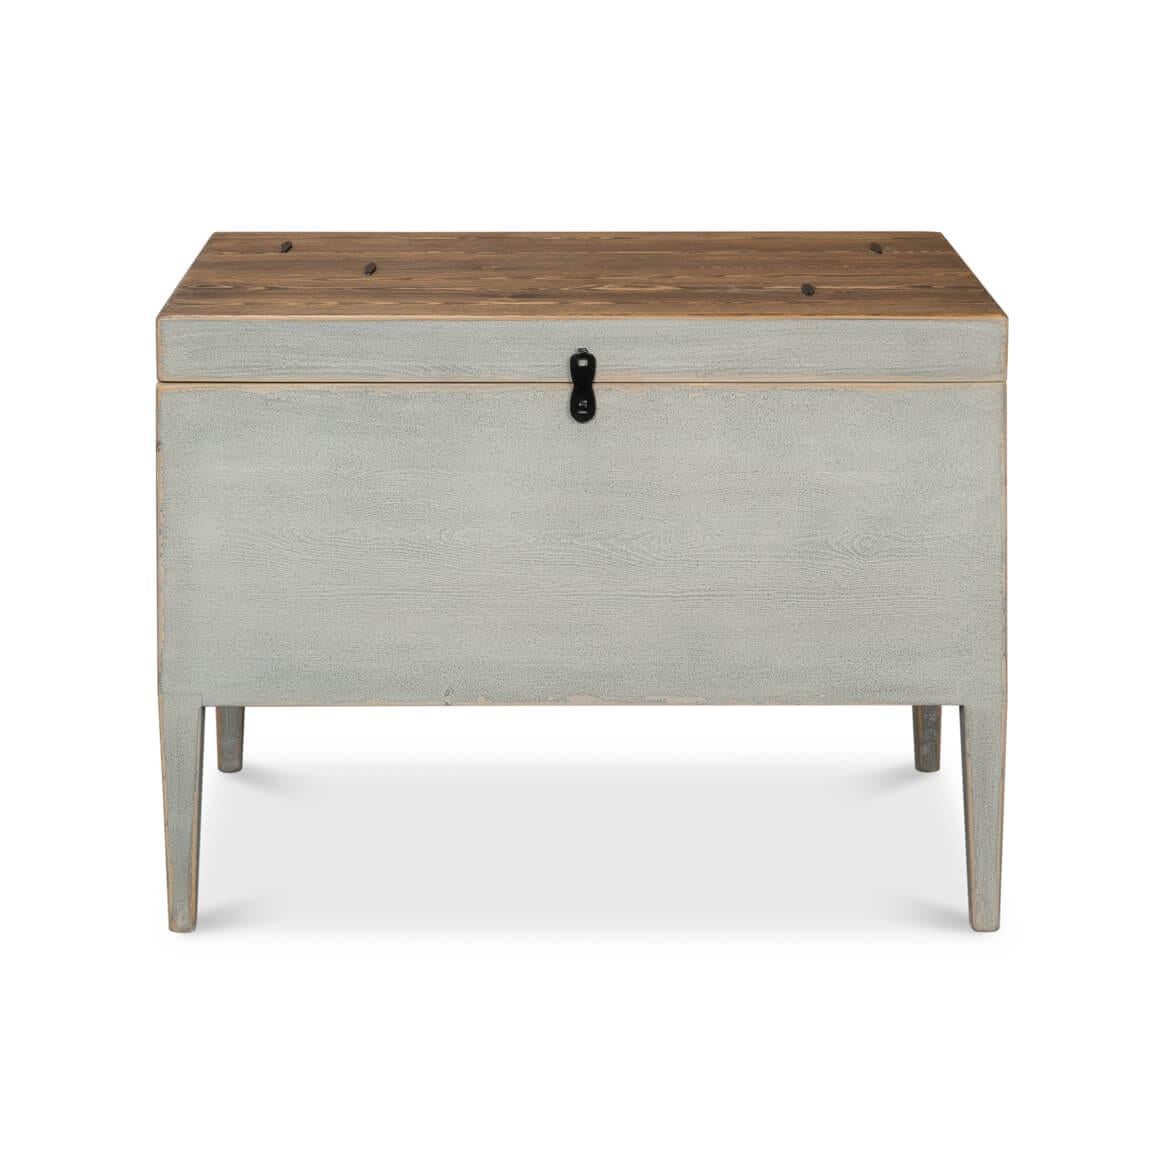 A rustic-style cityscape gray painted wooden trunk that exudes vintage charm and functionality. Constructed of a richly textured hardwood, evidenced by the pronounced grain, which suggests durability and natural beauty. 

The wood has a weathered